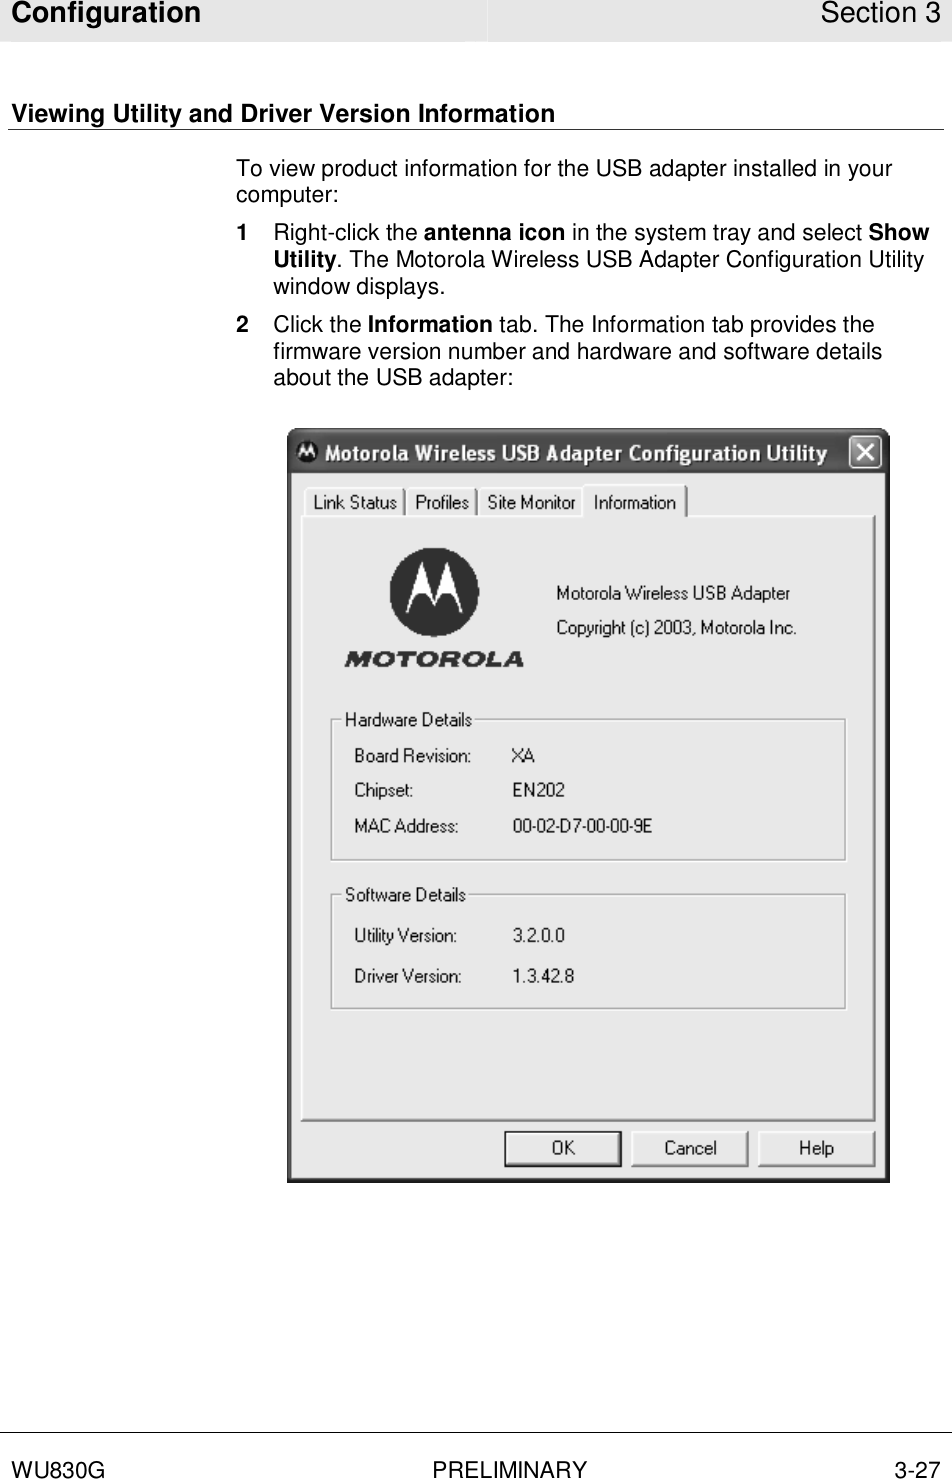 Configuration Section 3  WU830G PRELIMINARY 3-27  Viewing Utility and Driver Version Information To view product information for the USB adapter installed in your computer: 1  Right-click the antenna icon in the system tray and select Show Utility. The Motorola Wireless USB Adapter Configuration Utility window displays. 2  Click the Information tab. The Information tab provides the firmware version number and hardware and software details about the USB adapter:   